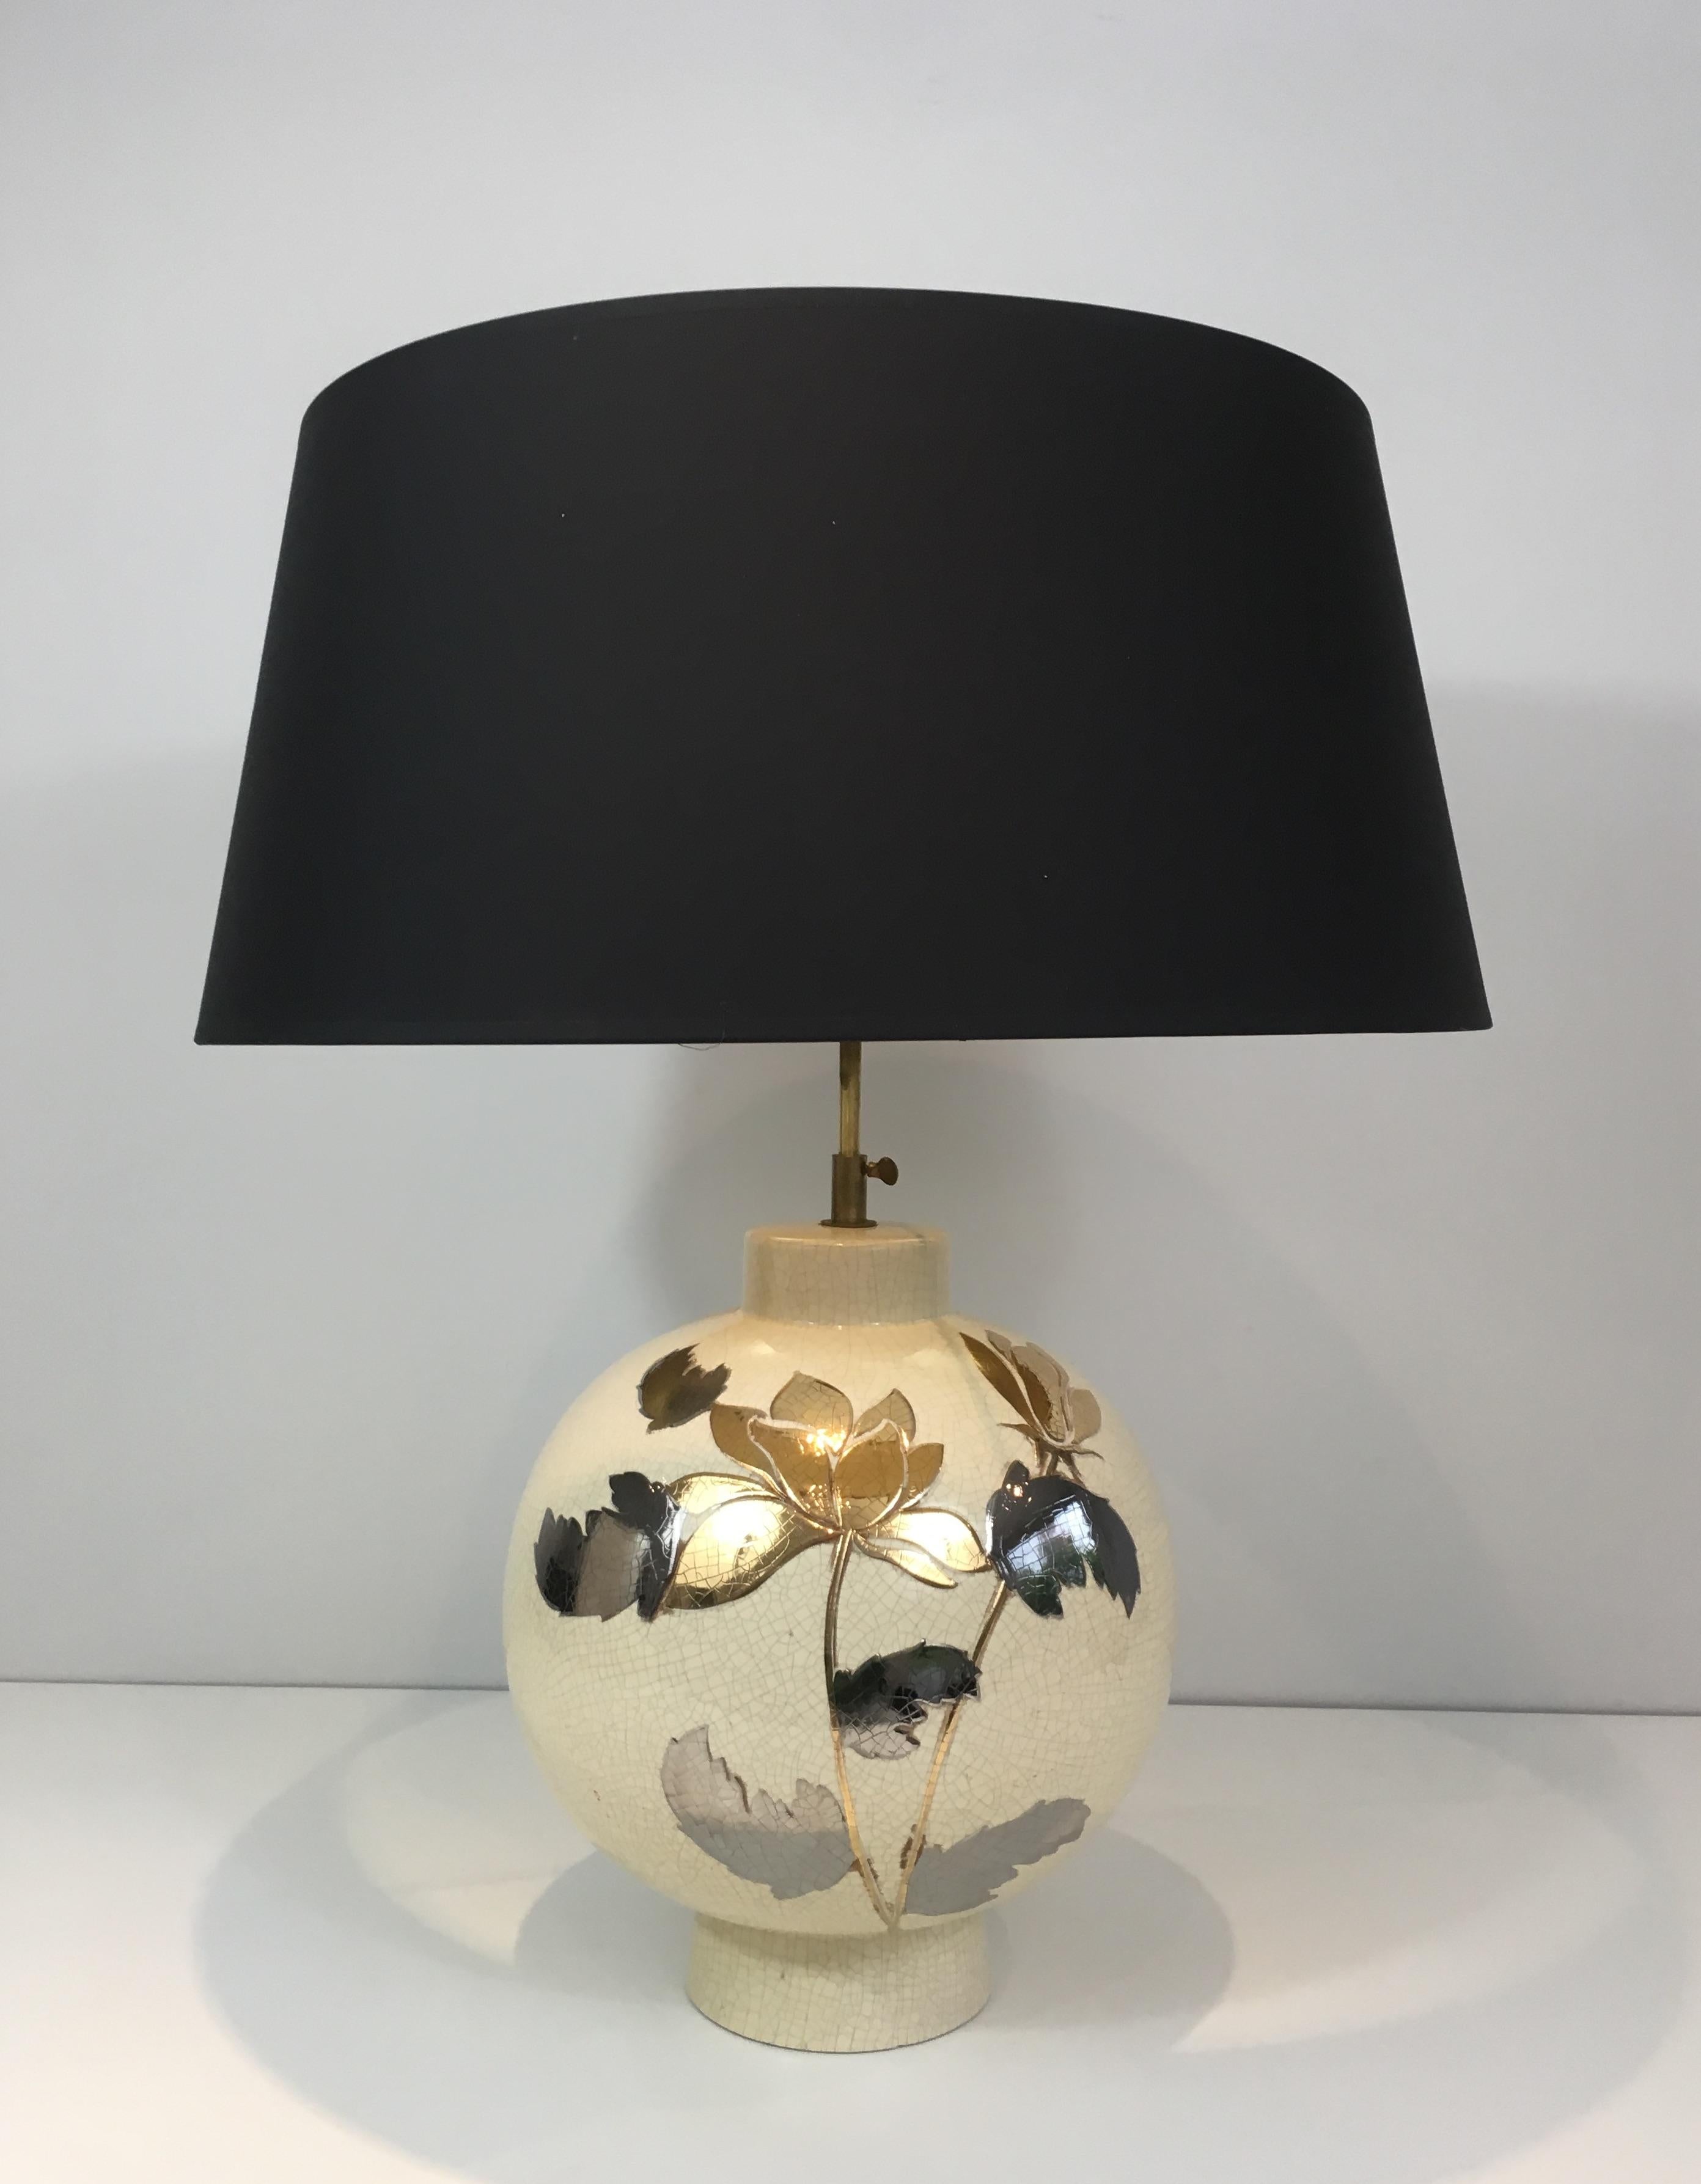 By L Drummer, Cracked Ceramic Lamp with Silver and Gold Flower Decoration on the 10